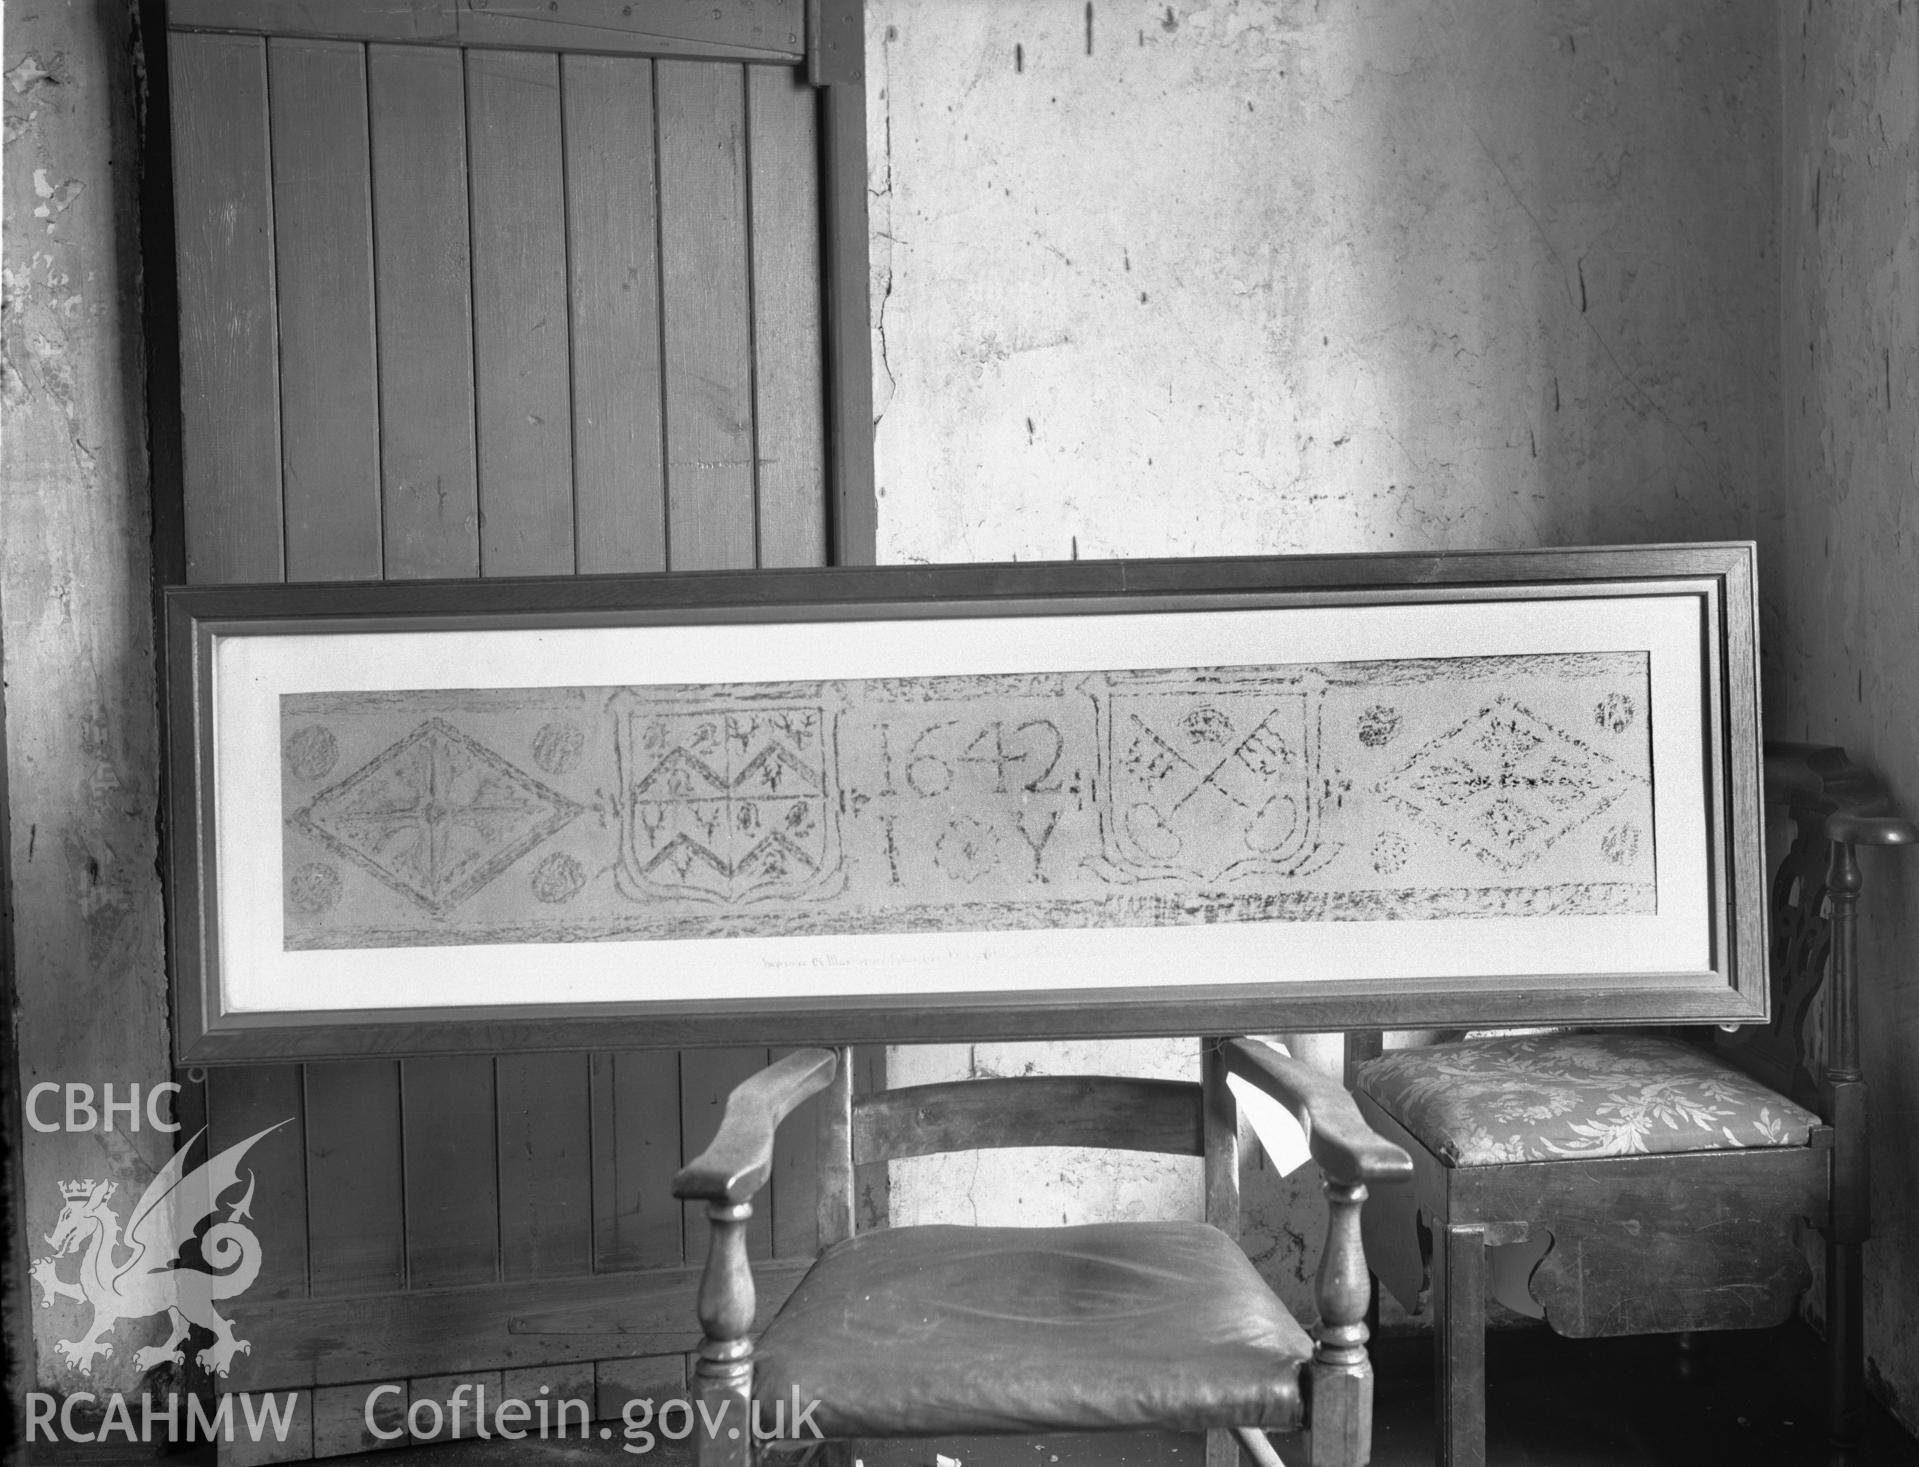 Interior view of Parlwr Mawr, Conway showing cloth with embroidered date, taken 01.01.1947.